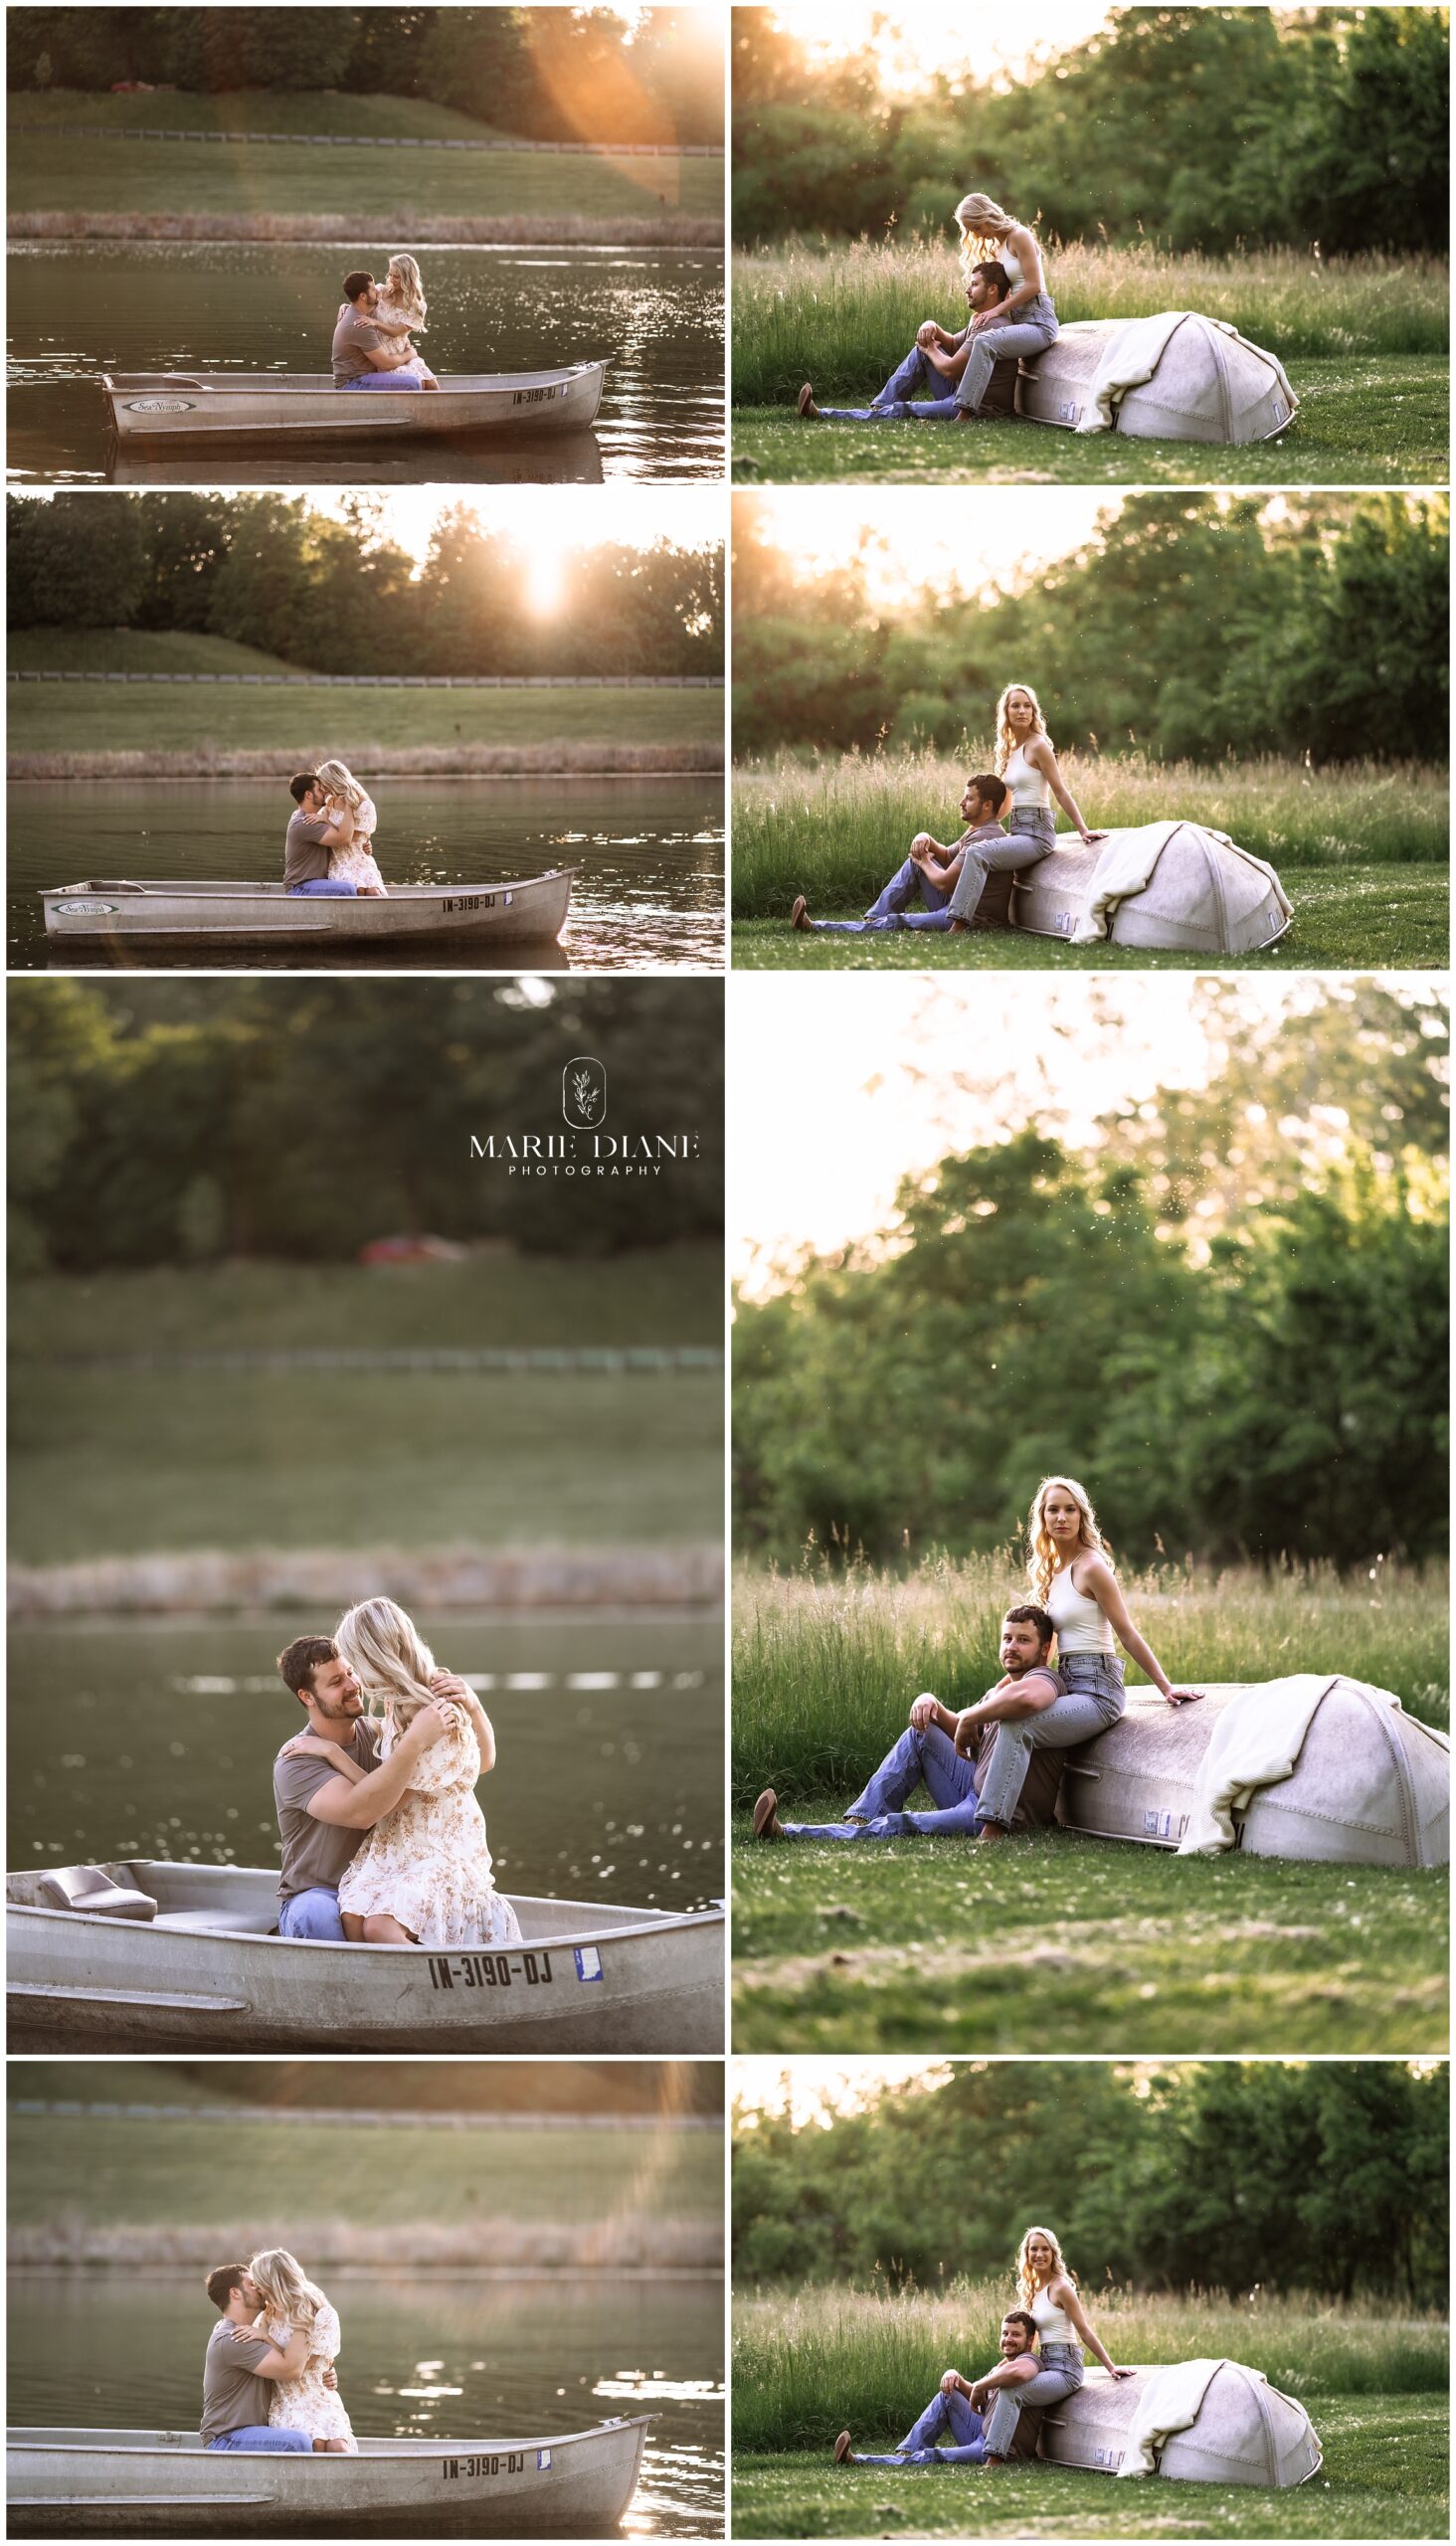 engagement session in small boat on water in images on left. Couple sitting against boat flipped upside down in front of tall grass on right. 